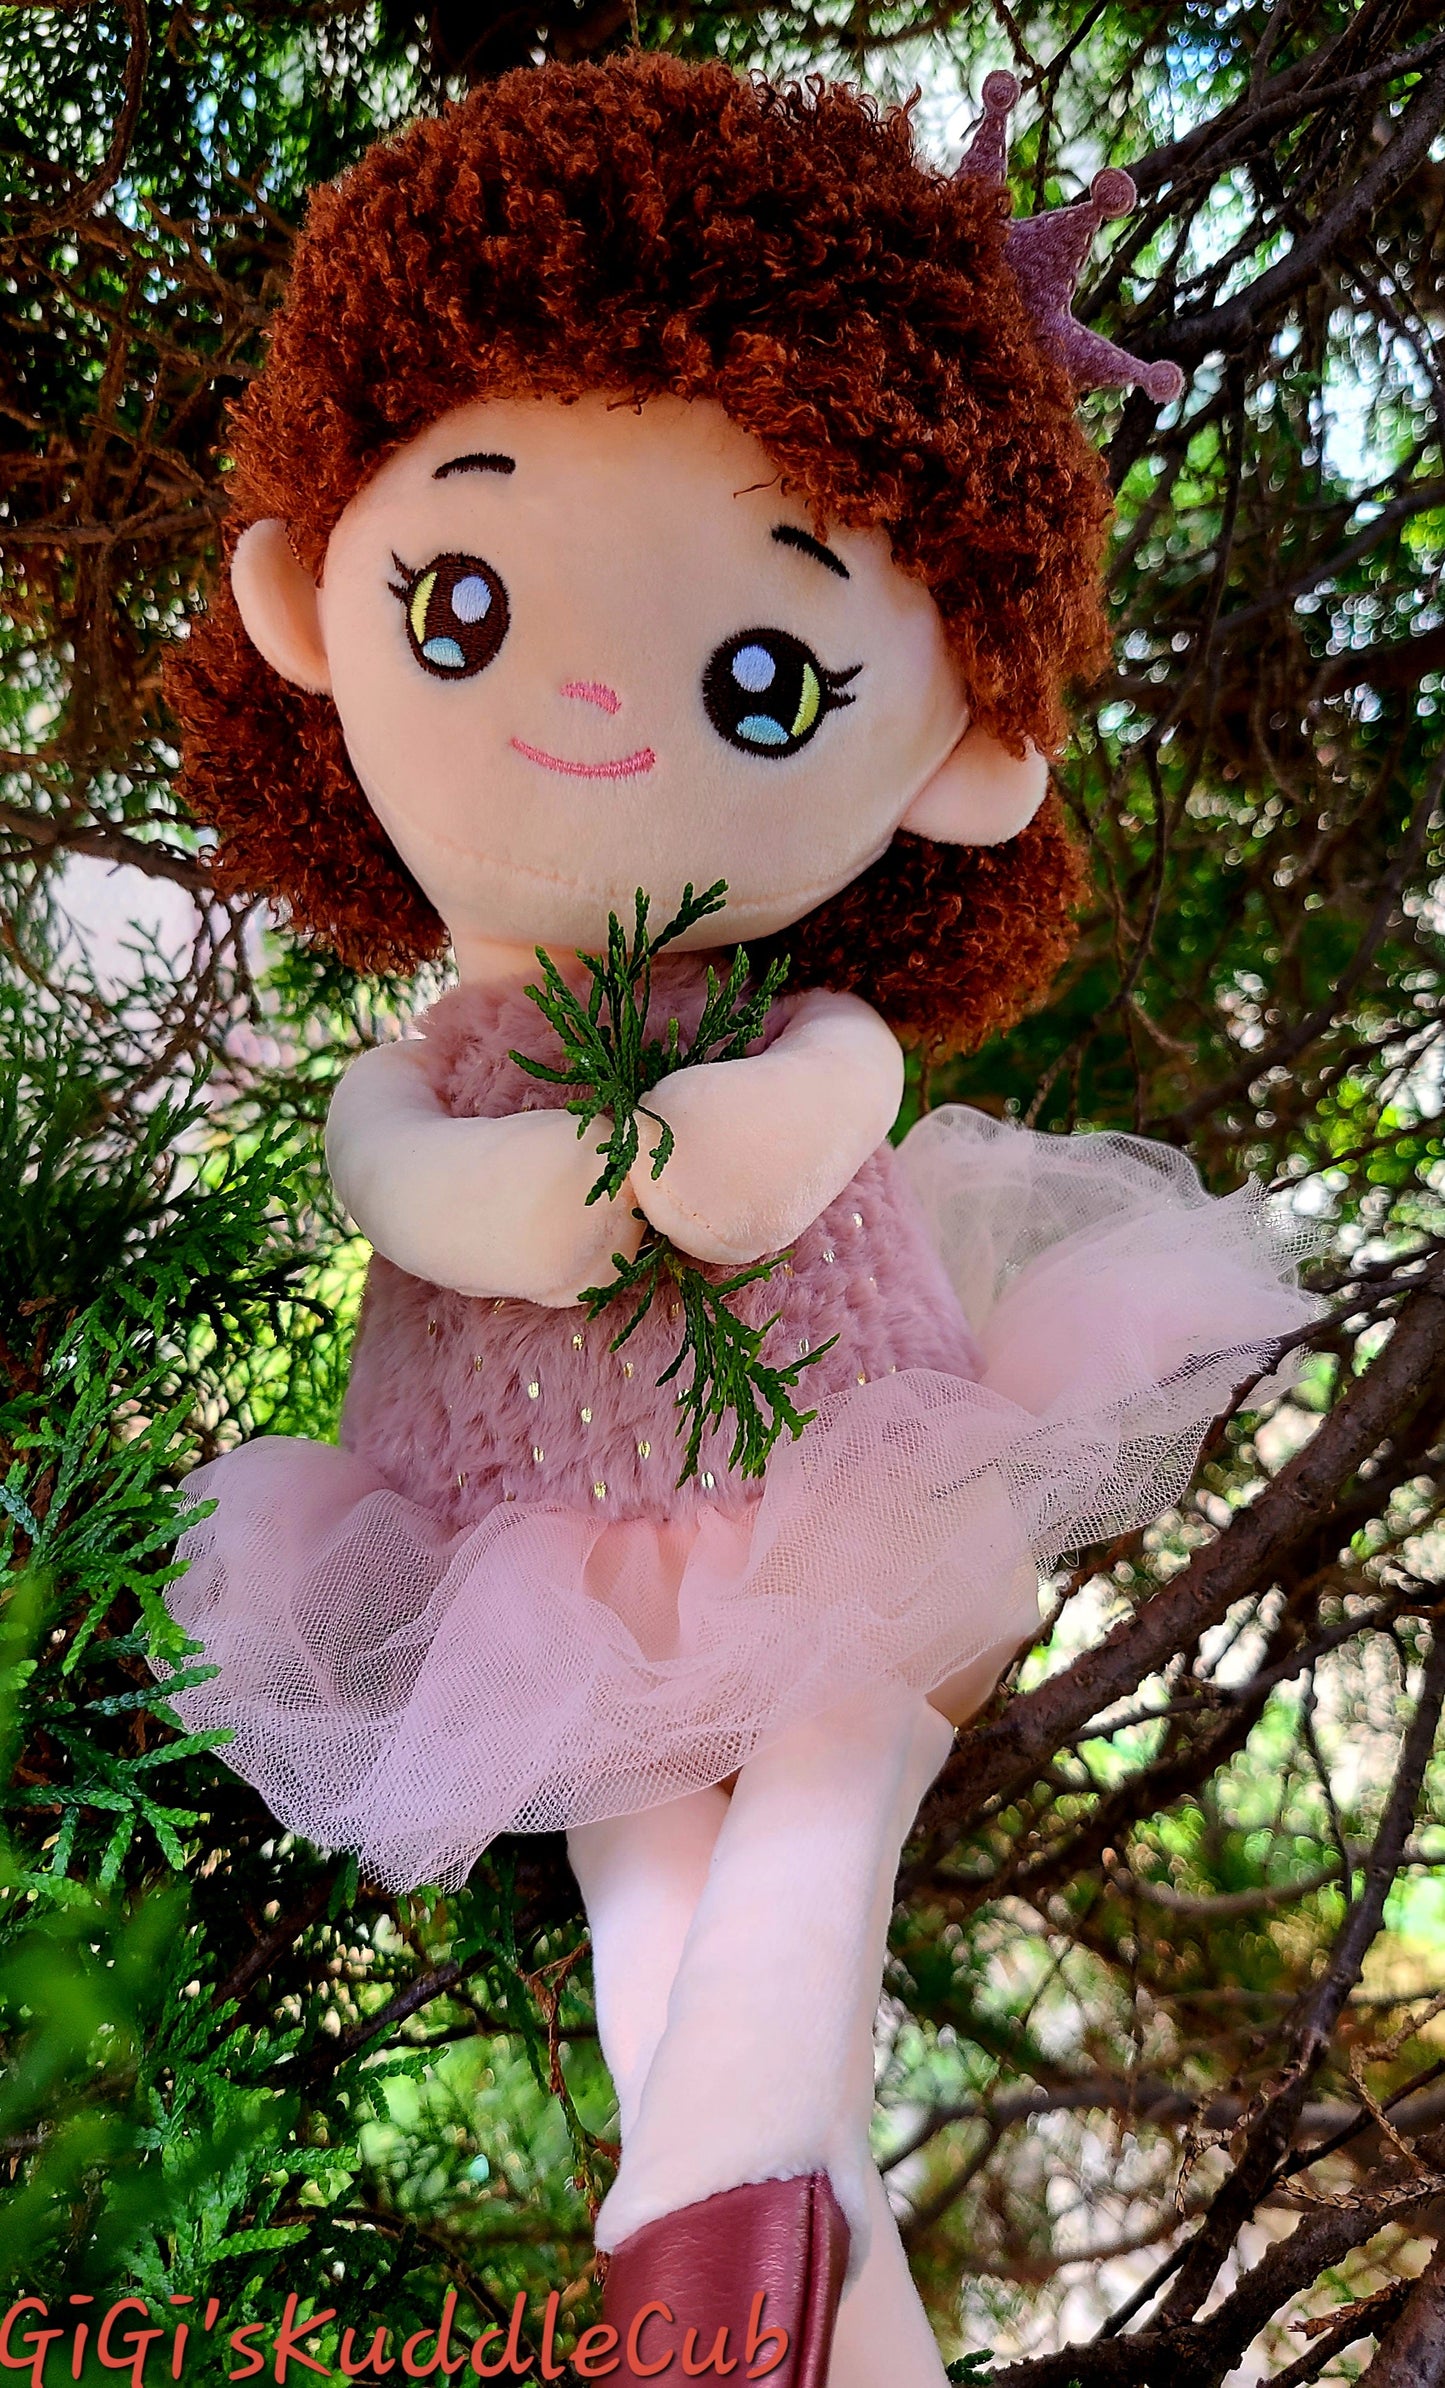 Personalized Soft Plush 15in Curly Red Hair Ballerina Princess Rag Doll Plush Toy/ Decor/Handmade Baby Gift Toy